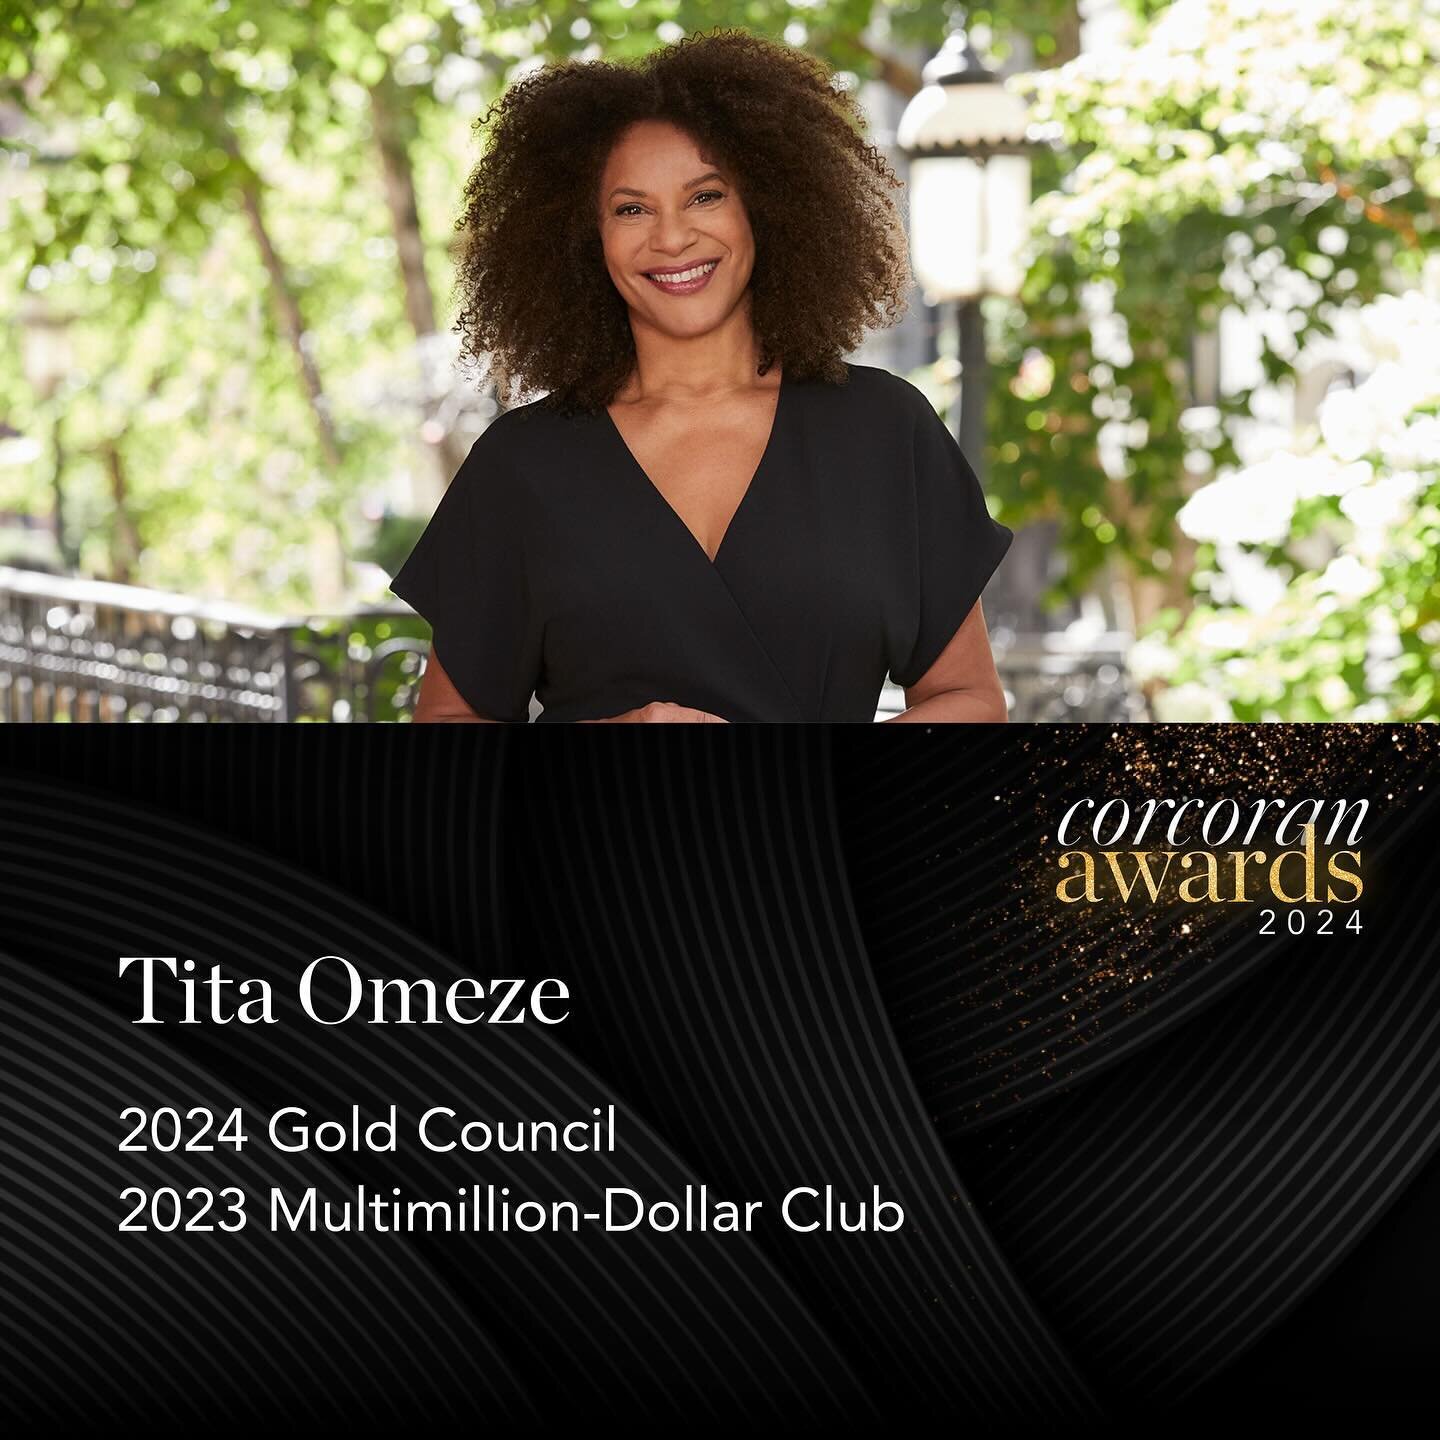 Fun time last night at Corcoran Awards Party and thrilled to learn I made the Gold Council with $35M sold in 2023. This doesn&rsquo;t happen on my own. Eternally grateful to my colleagues @deborah.rieders.bklyn  @sheriterrynyc @lcdetwiler and contrac